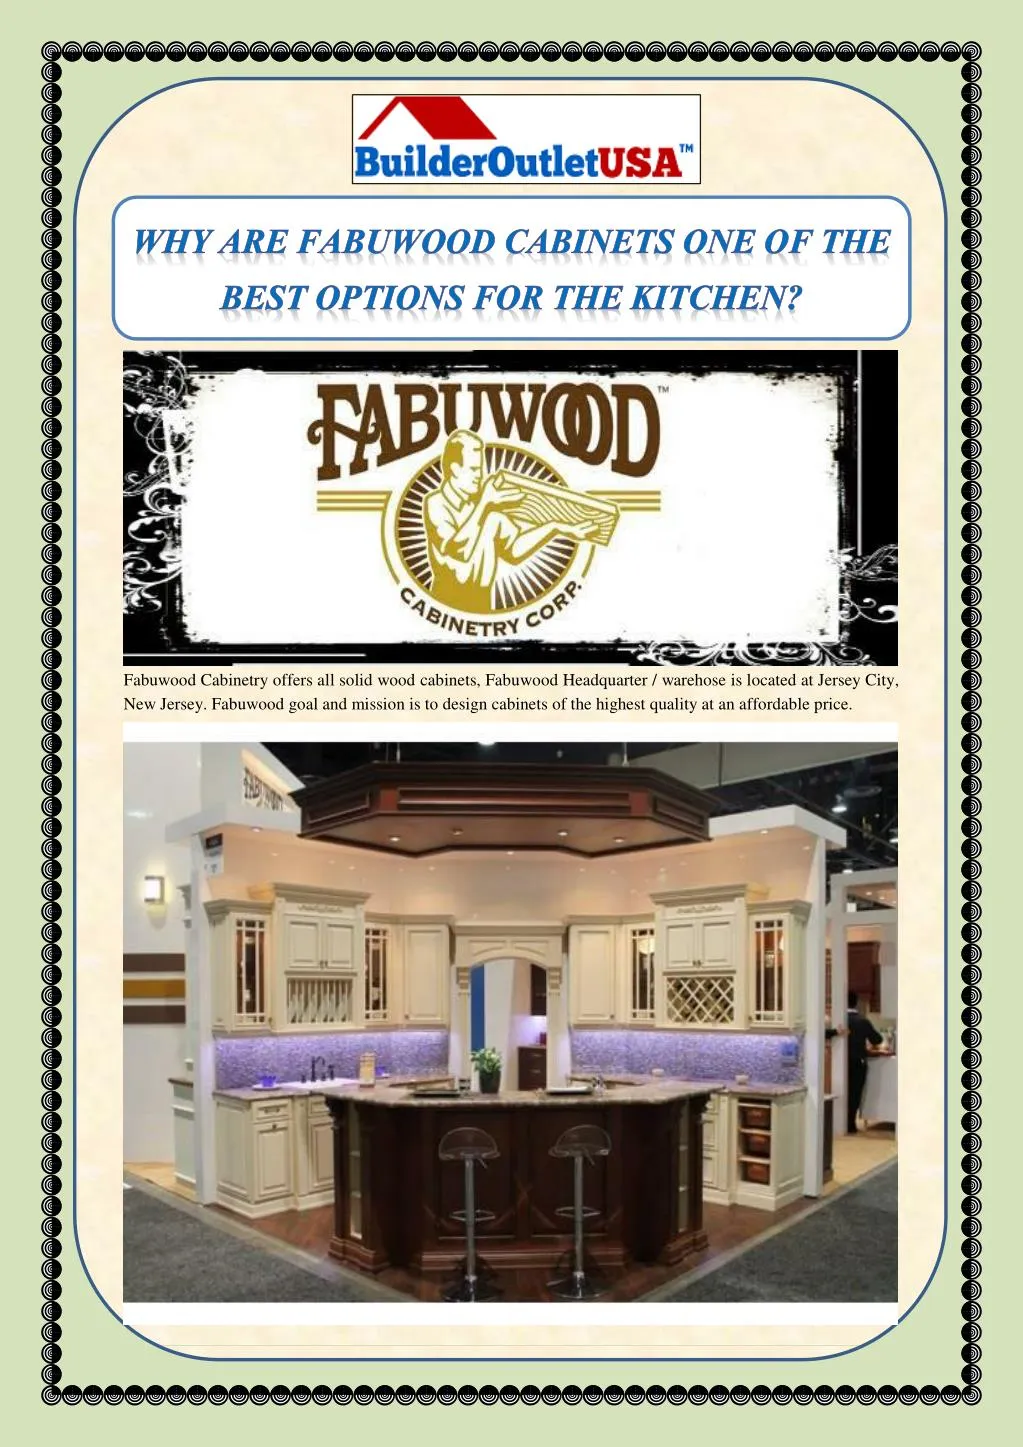 fabuwood cabinetry offers all solid wood cabinets